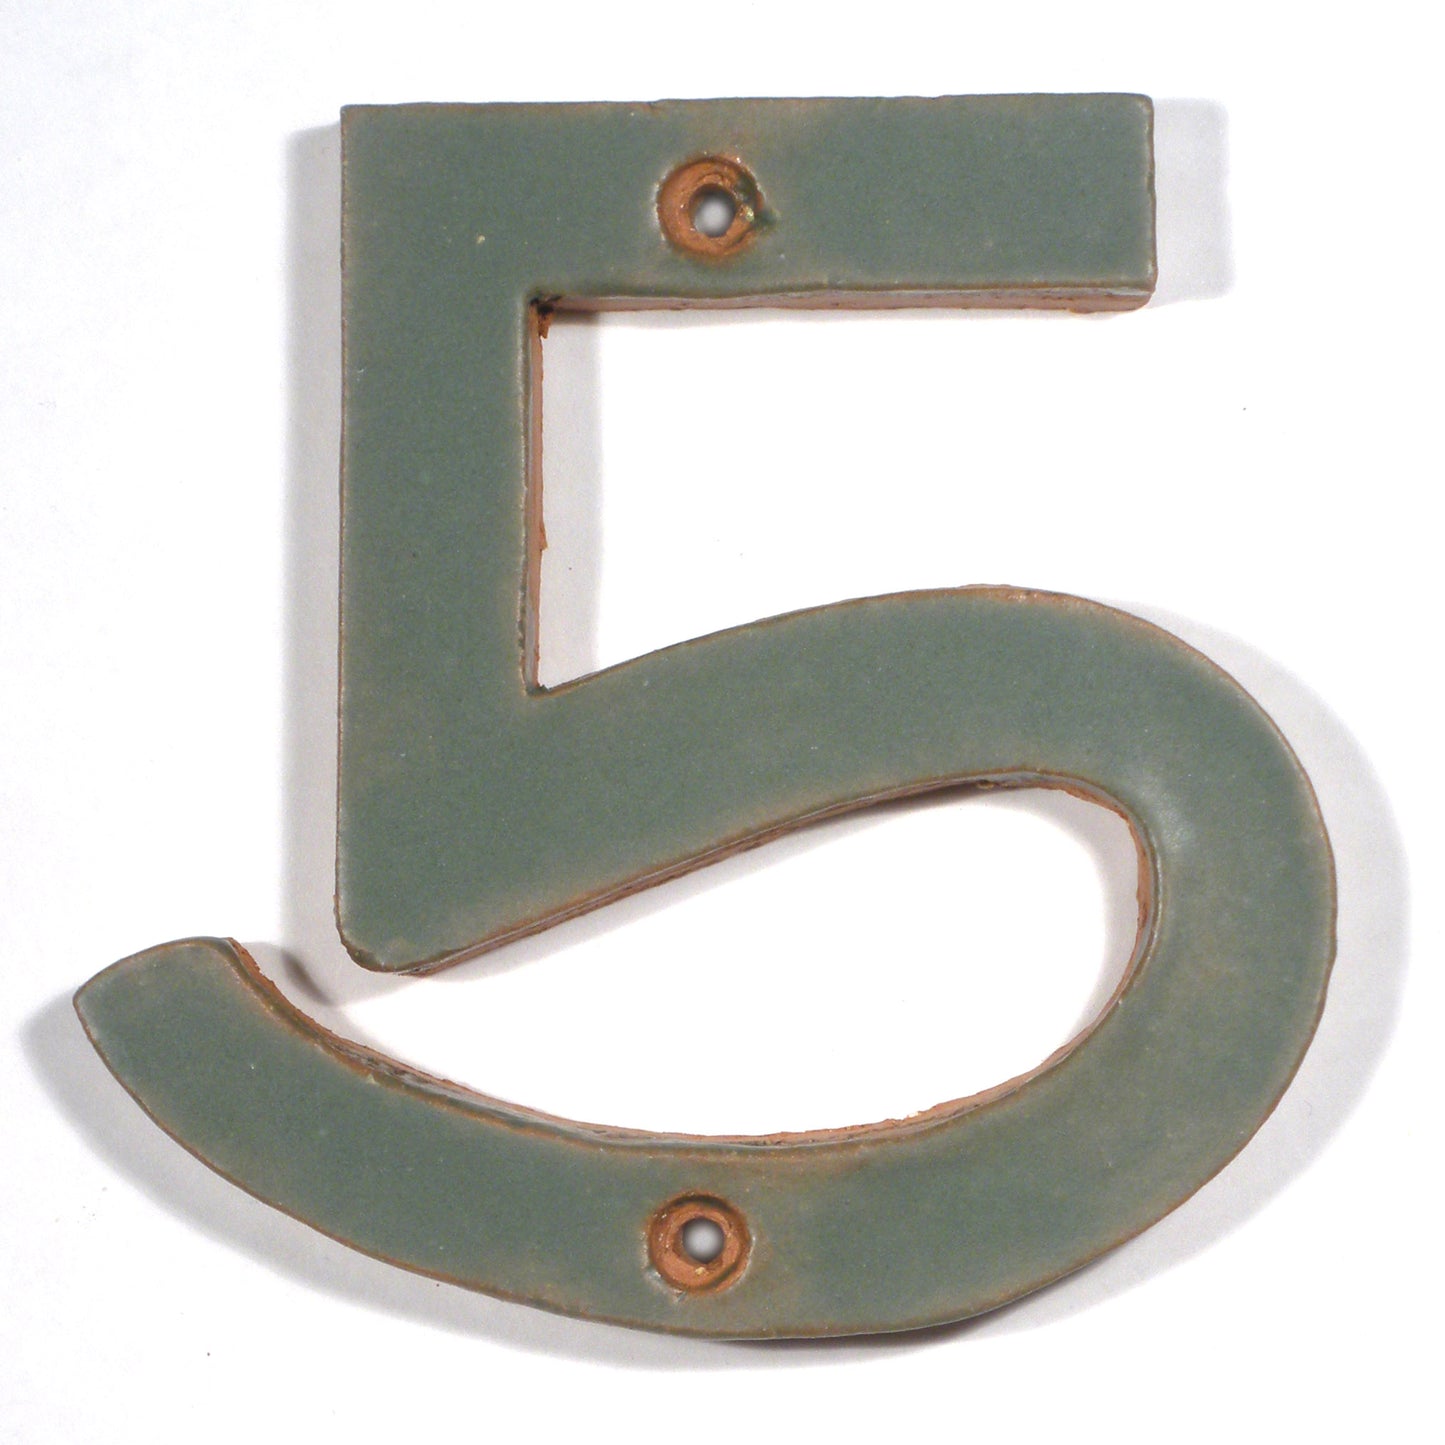 Dark Green Art & Crafts Cut Out House Numbers